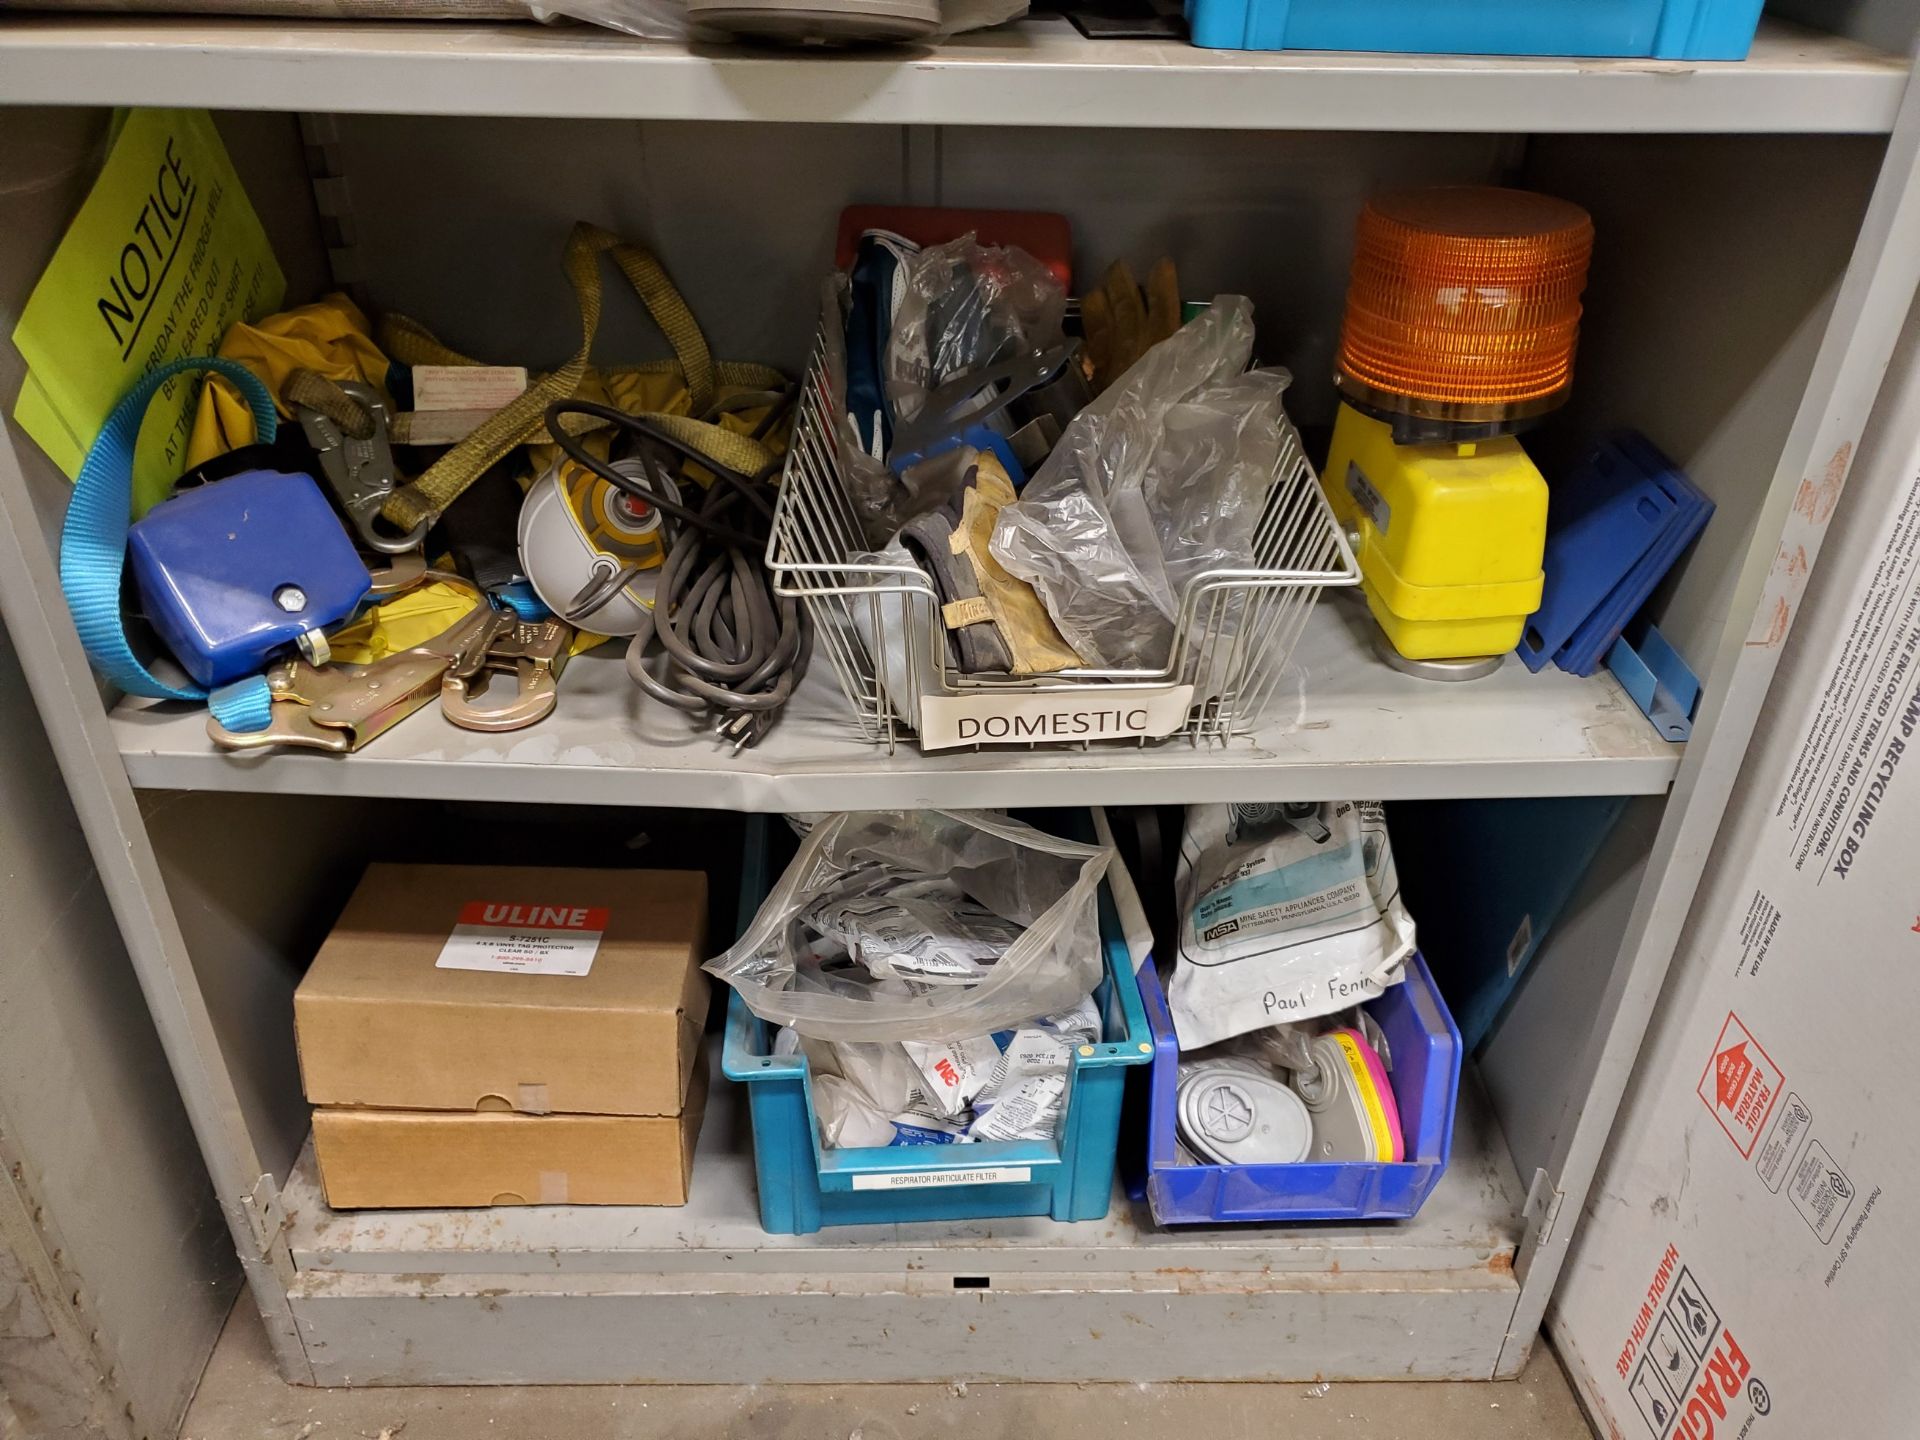 SHELVING UNIT W/ CONTENTS, RESPIRATOR, FILTERS, GLOVES, SAFETY STRAPS, MEDICAL WASTE BOX, BOOTS, - Image 4 of 12